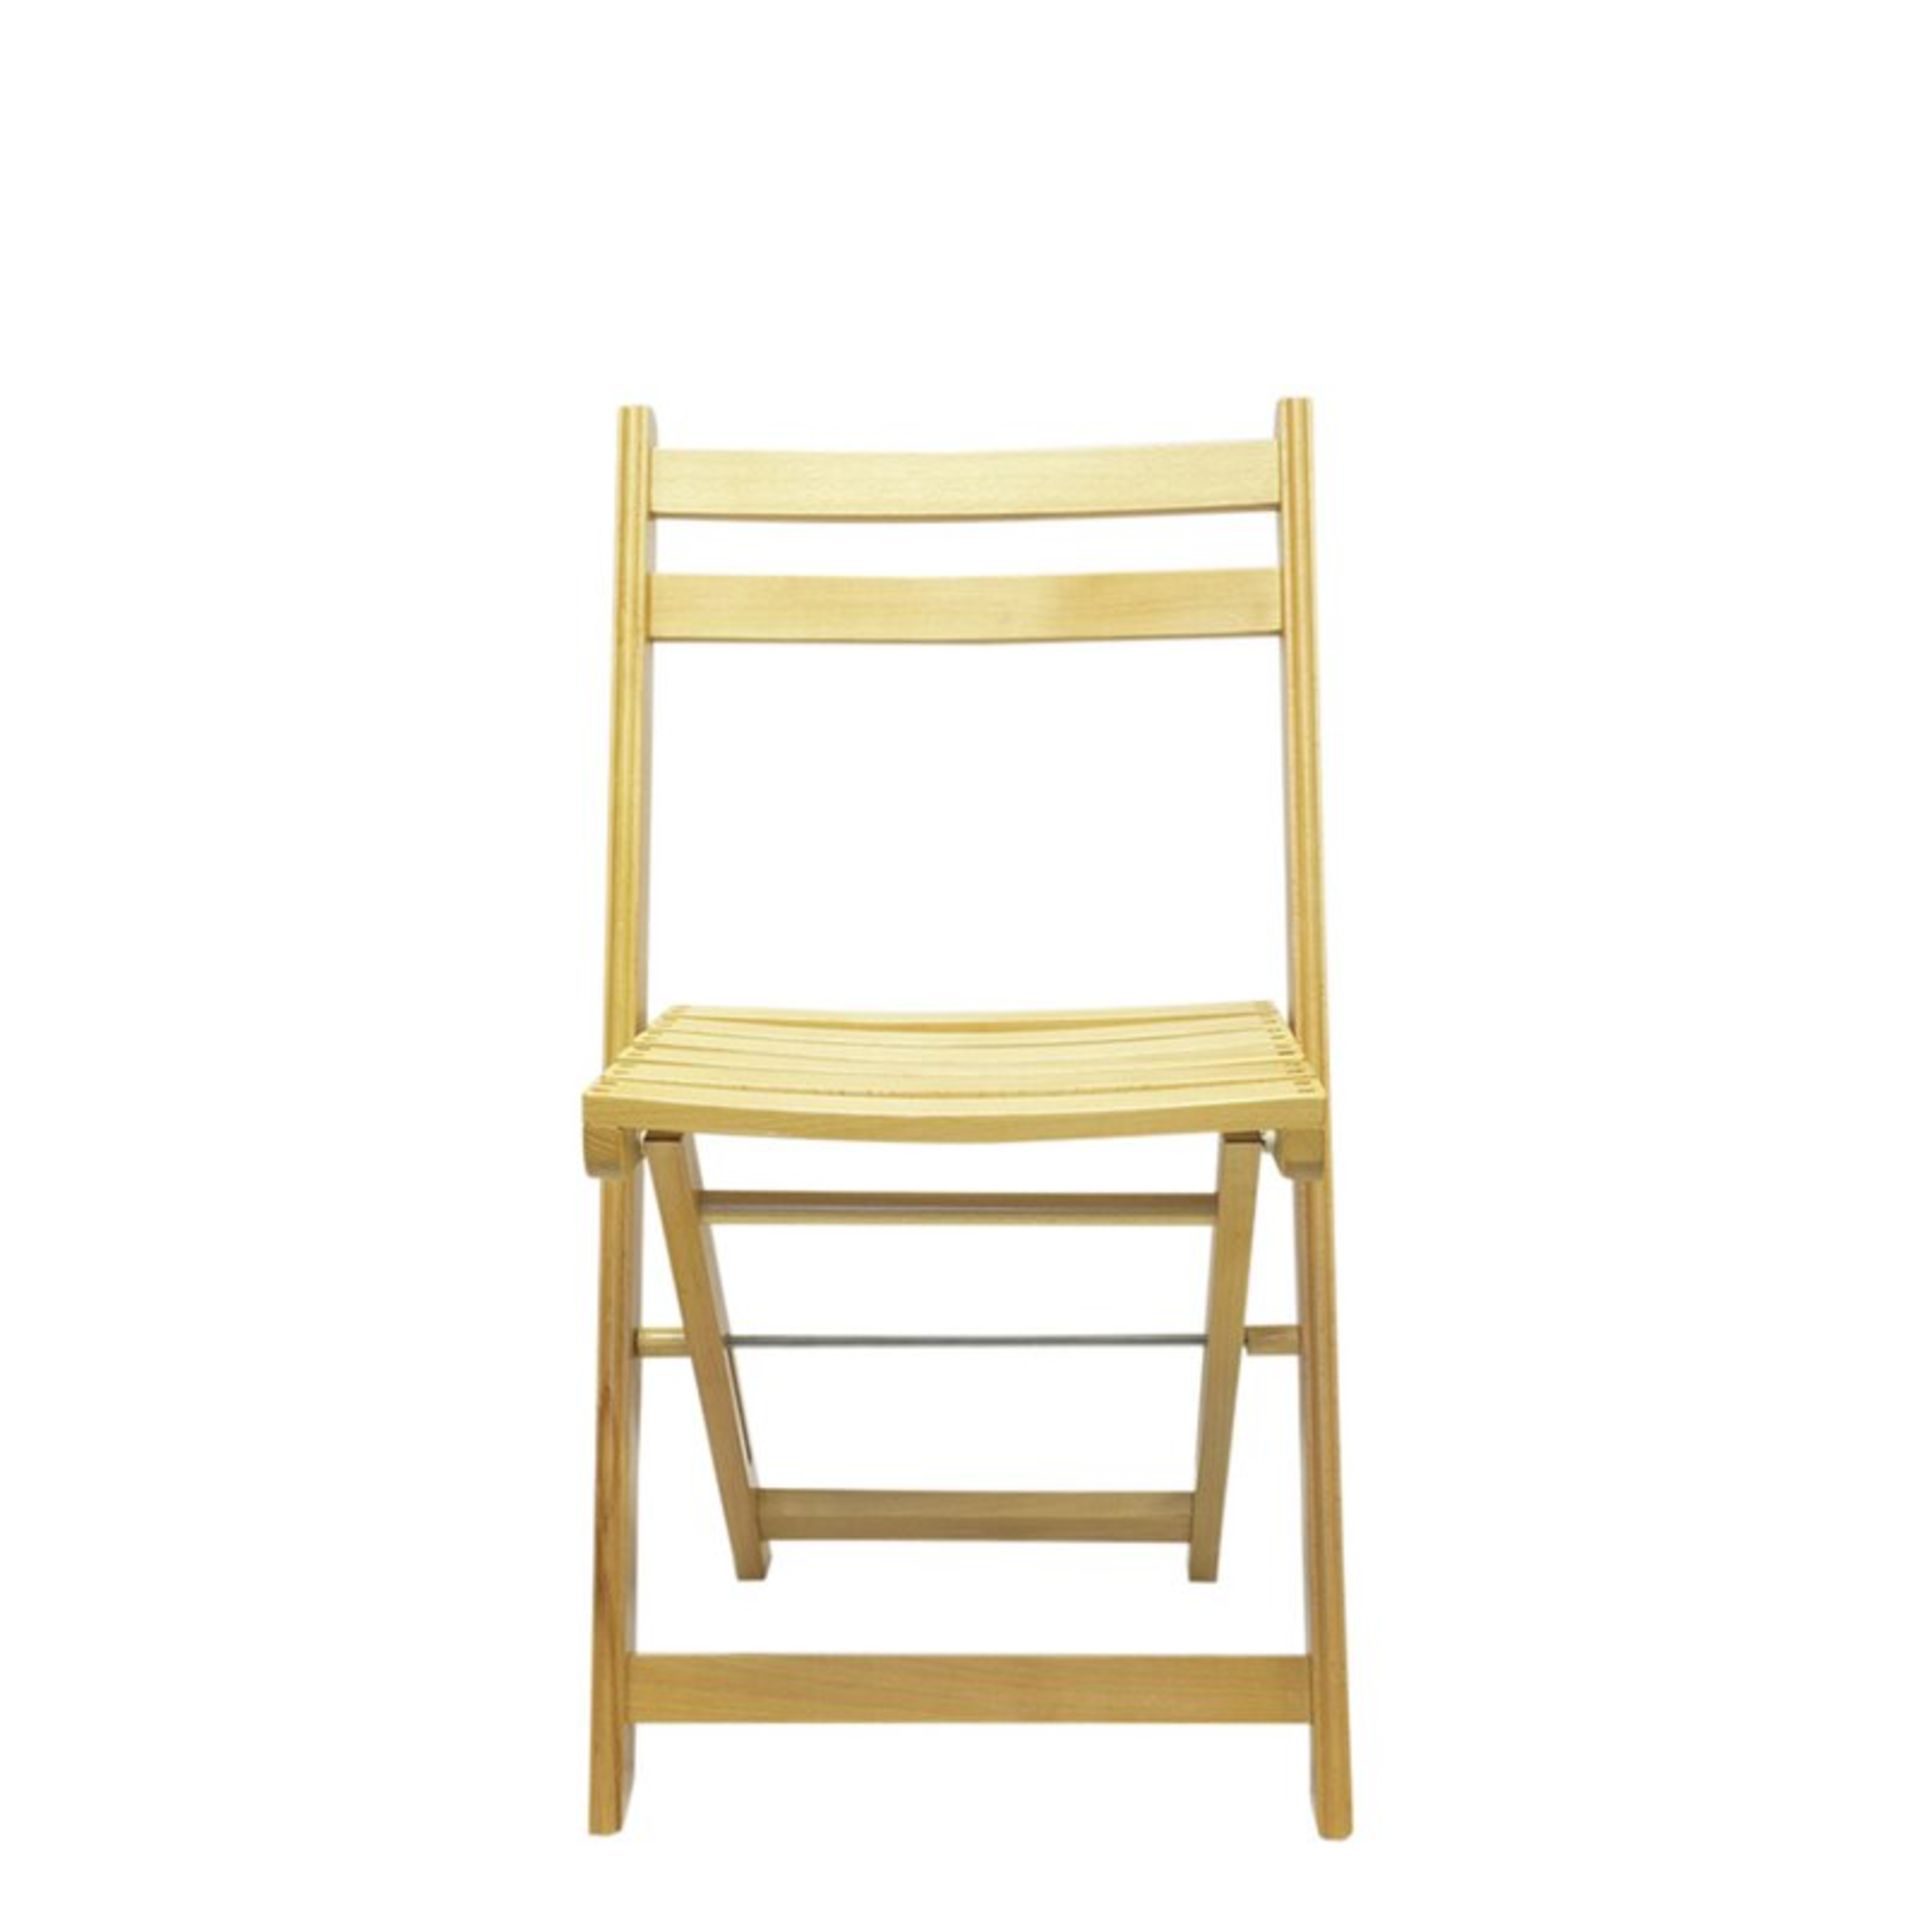 Brambly Cottage Hong Wood Folding Chair (white) - Image 2 of 4